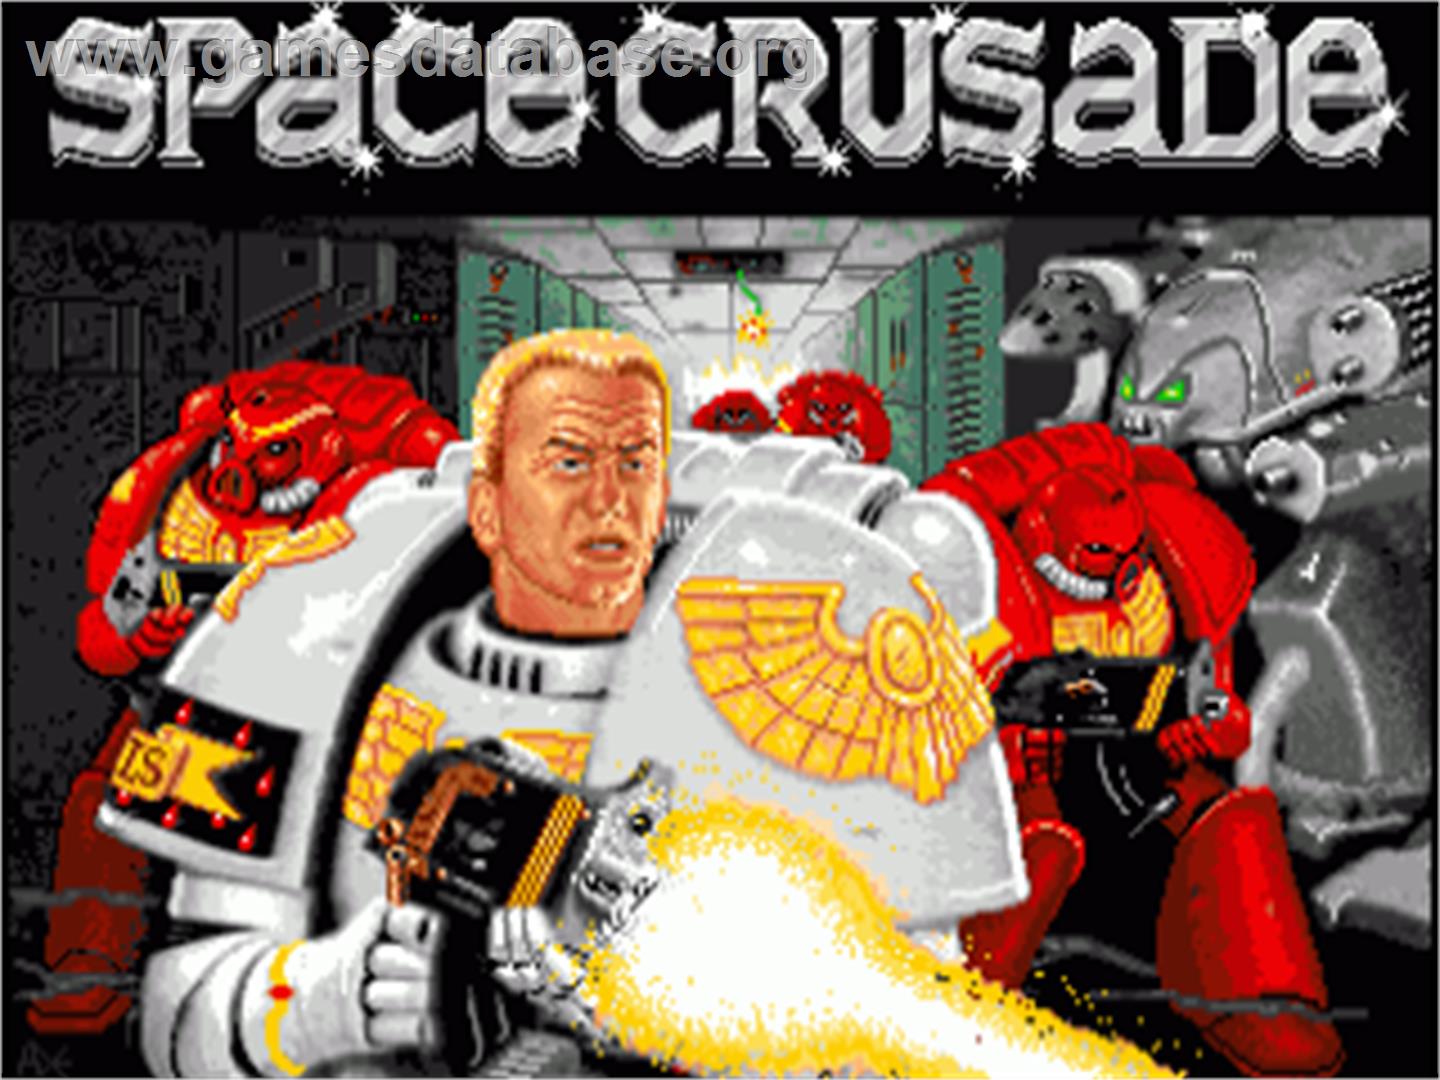 Space Crusade: The Voyage Beyond (Data Disk) - Commodore Amiga - Artwork - Title Screen